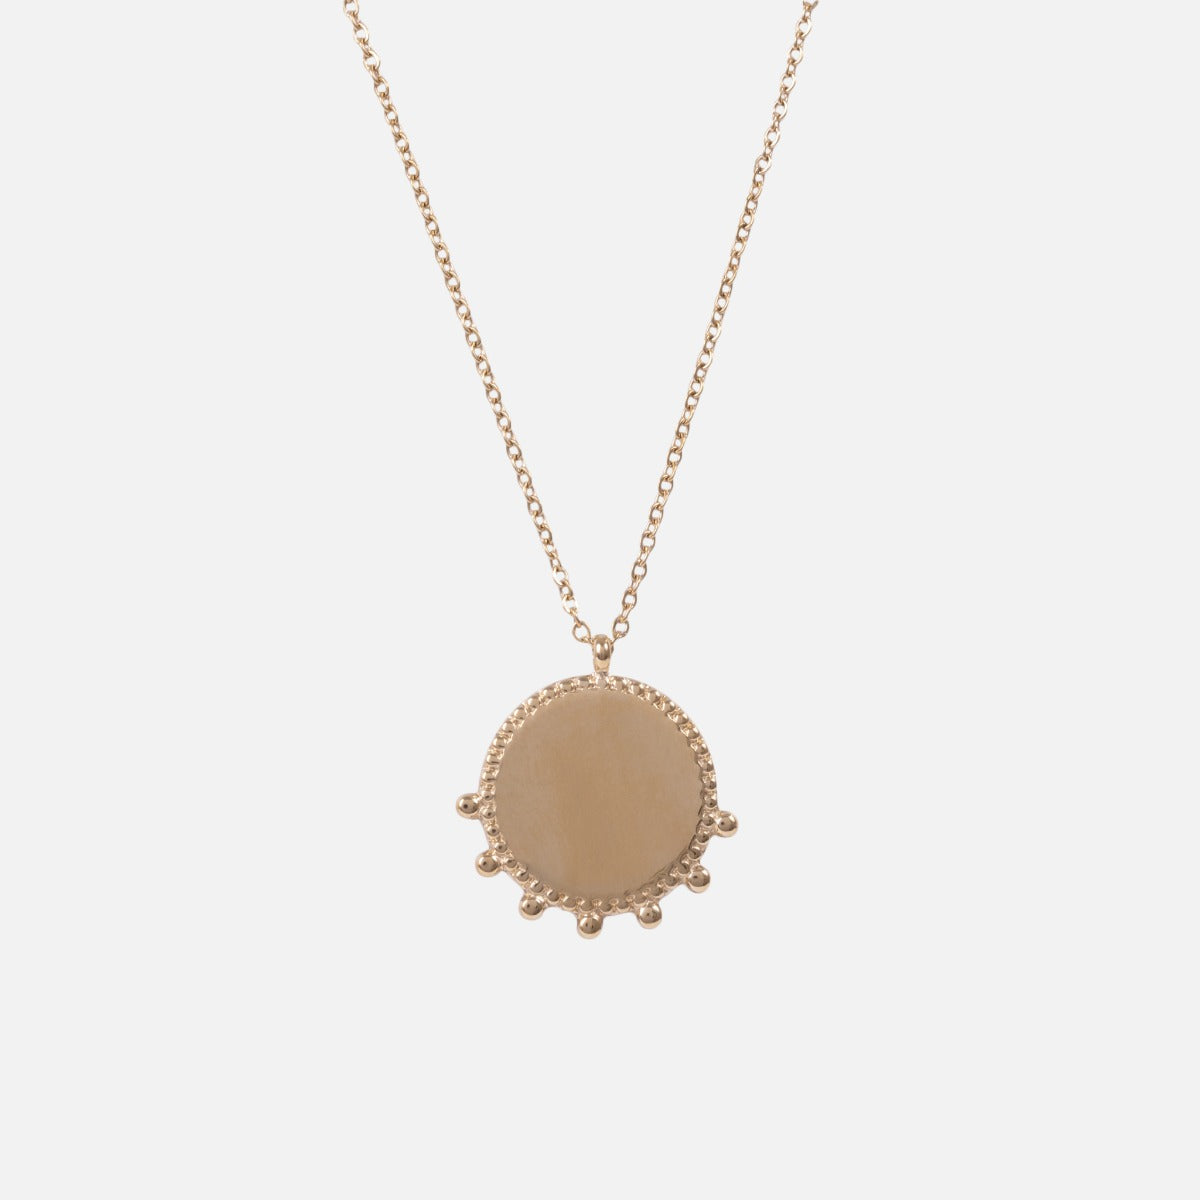 Golden stainless steel necklace with original circular medallion